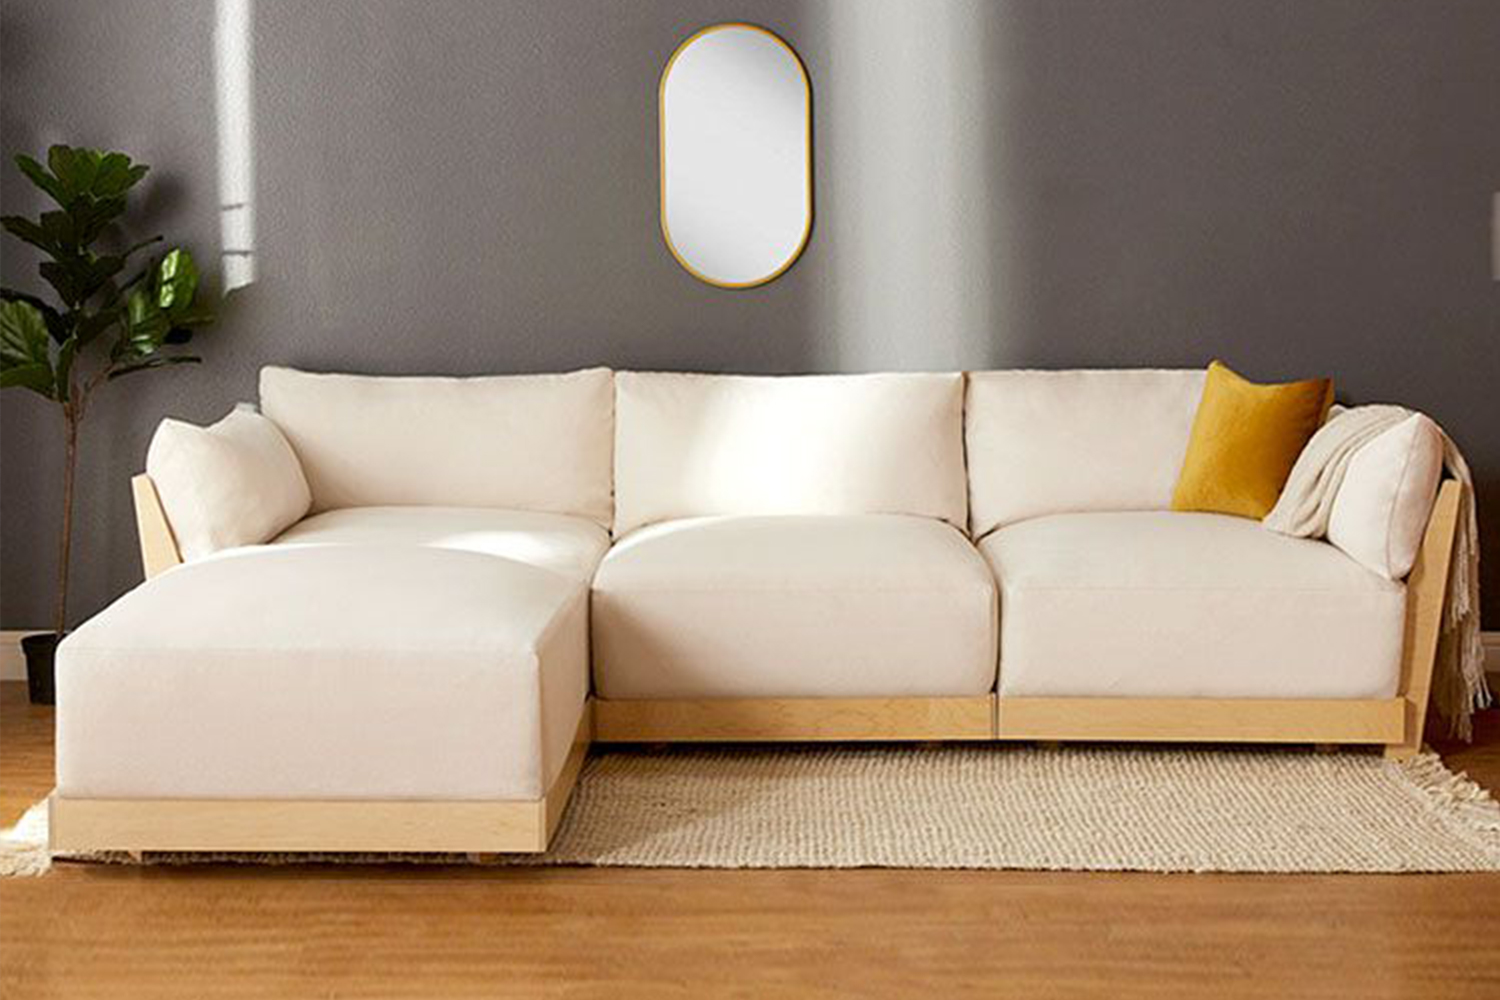 The Bondi sofa from Inside Weather with a chaise on the end